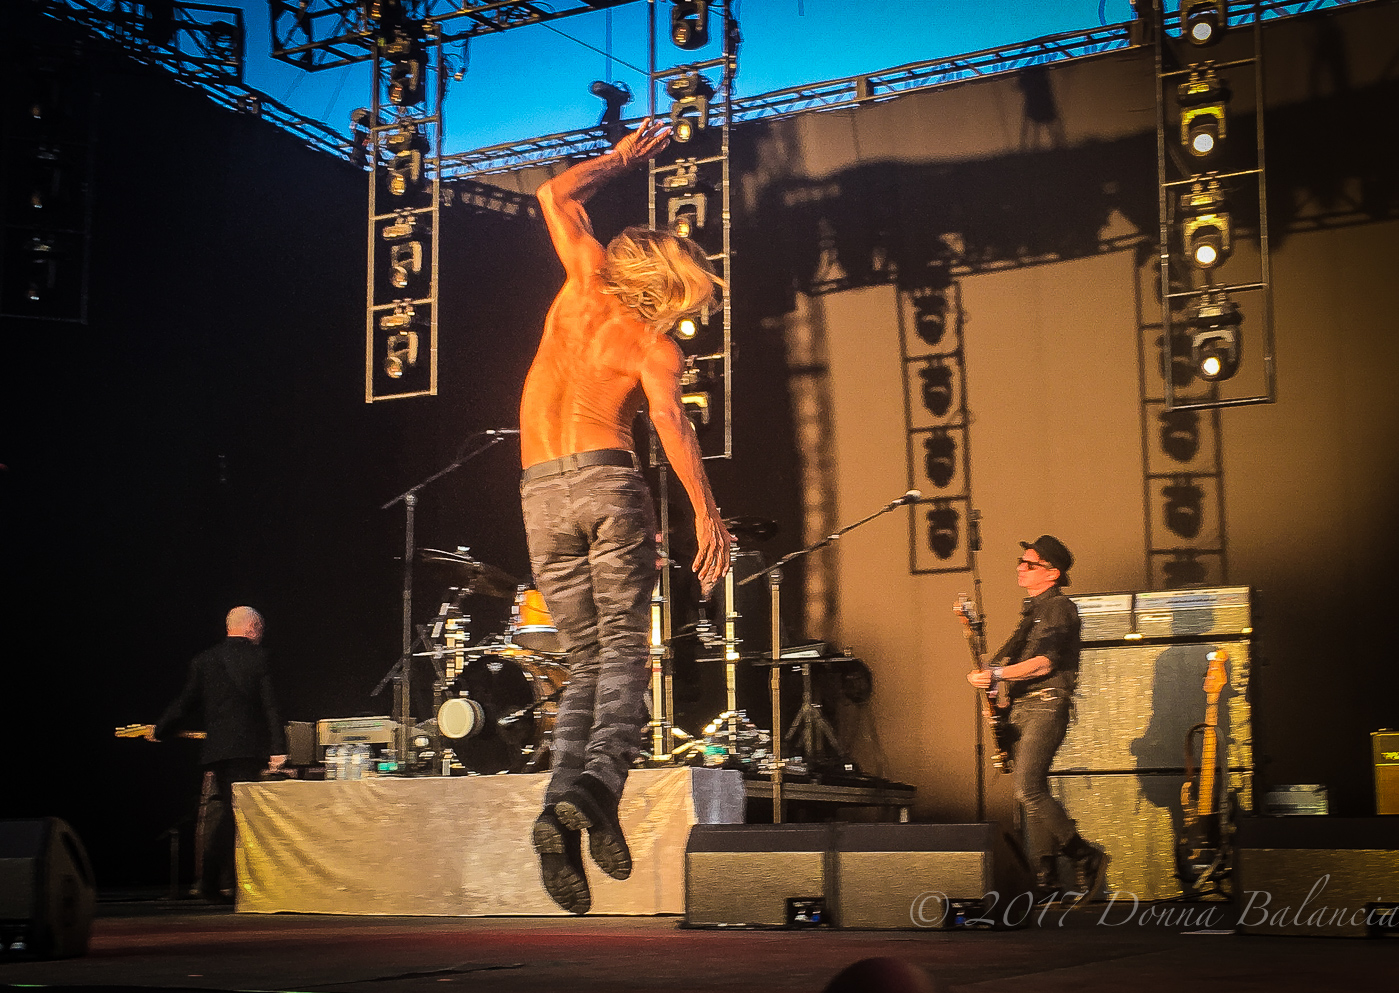 Iggy Pop still has the moves, but he's not moving from Miami he says - Photo © 2017 Donna Balancia